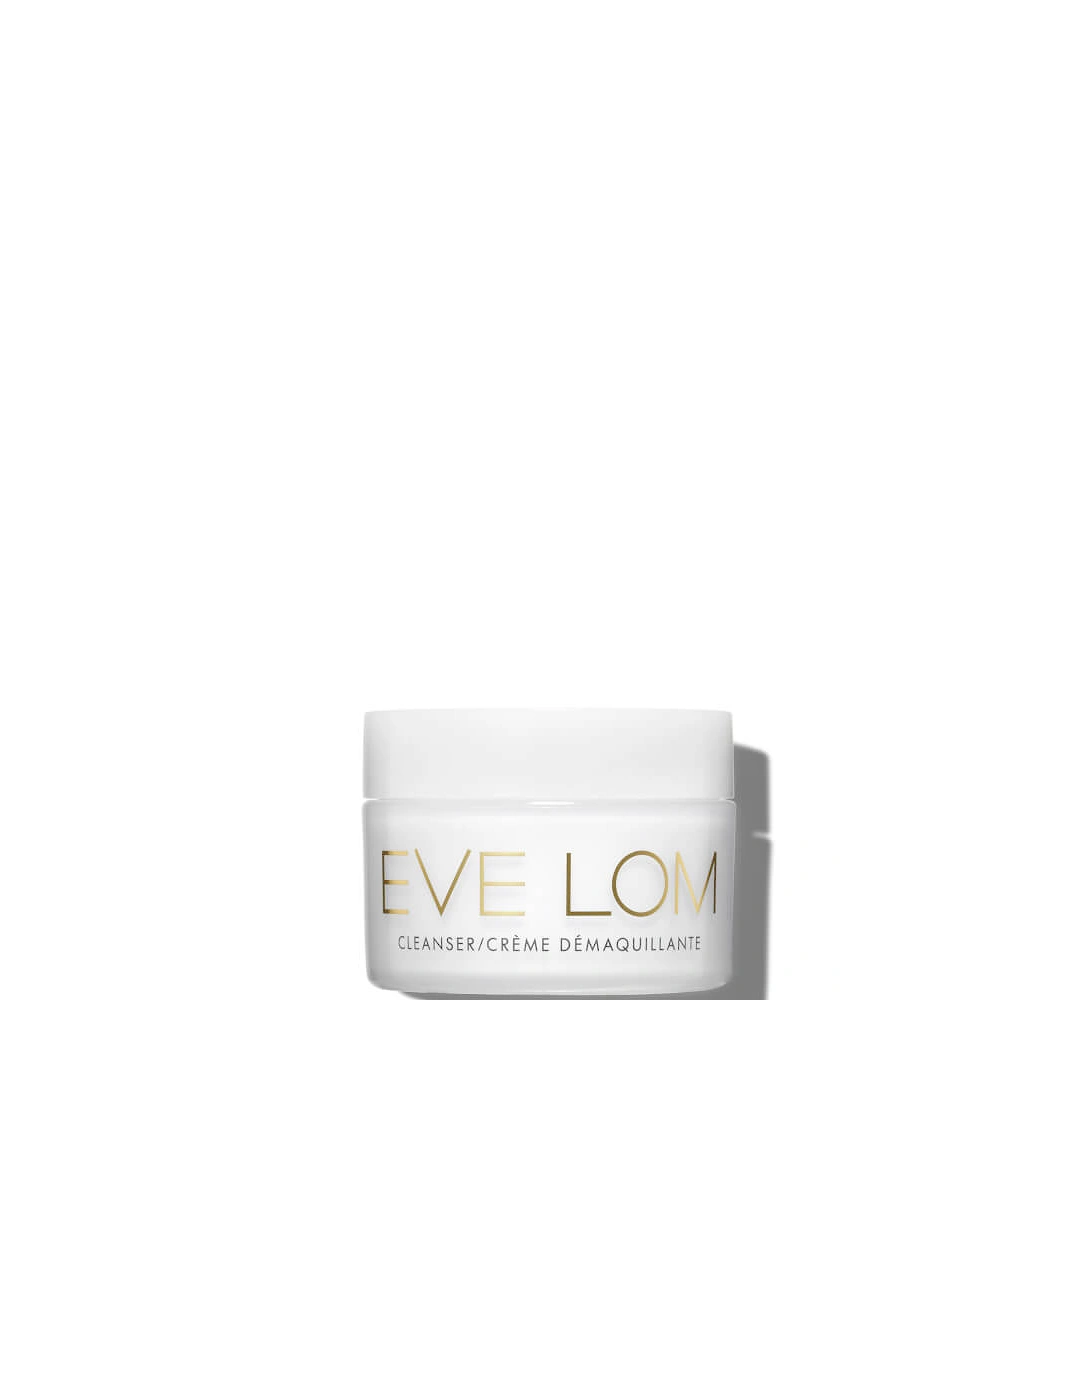 Cleanser and 1/2 Cloth 20ml - Eve Lom, 2 of 1